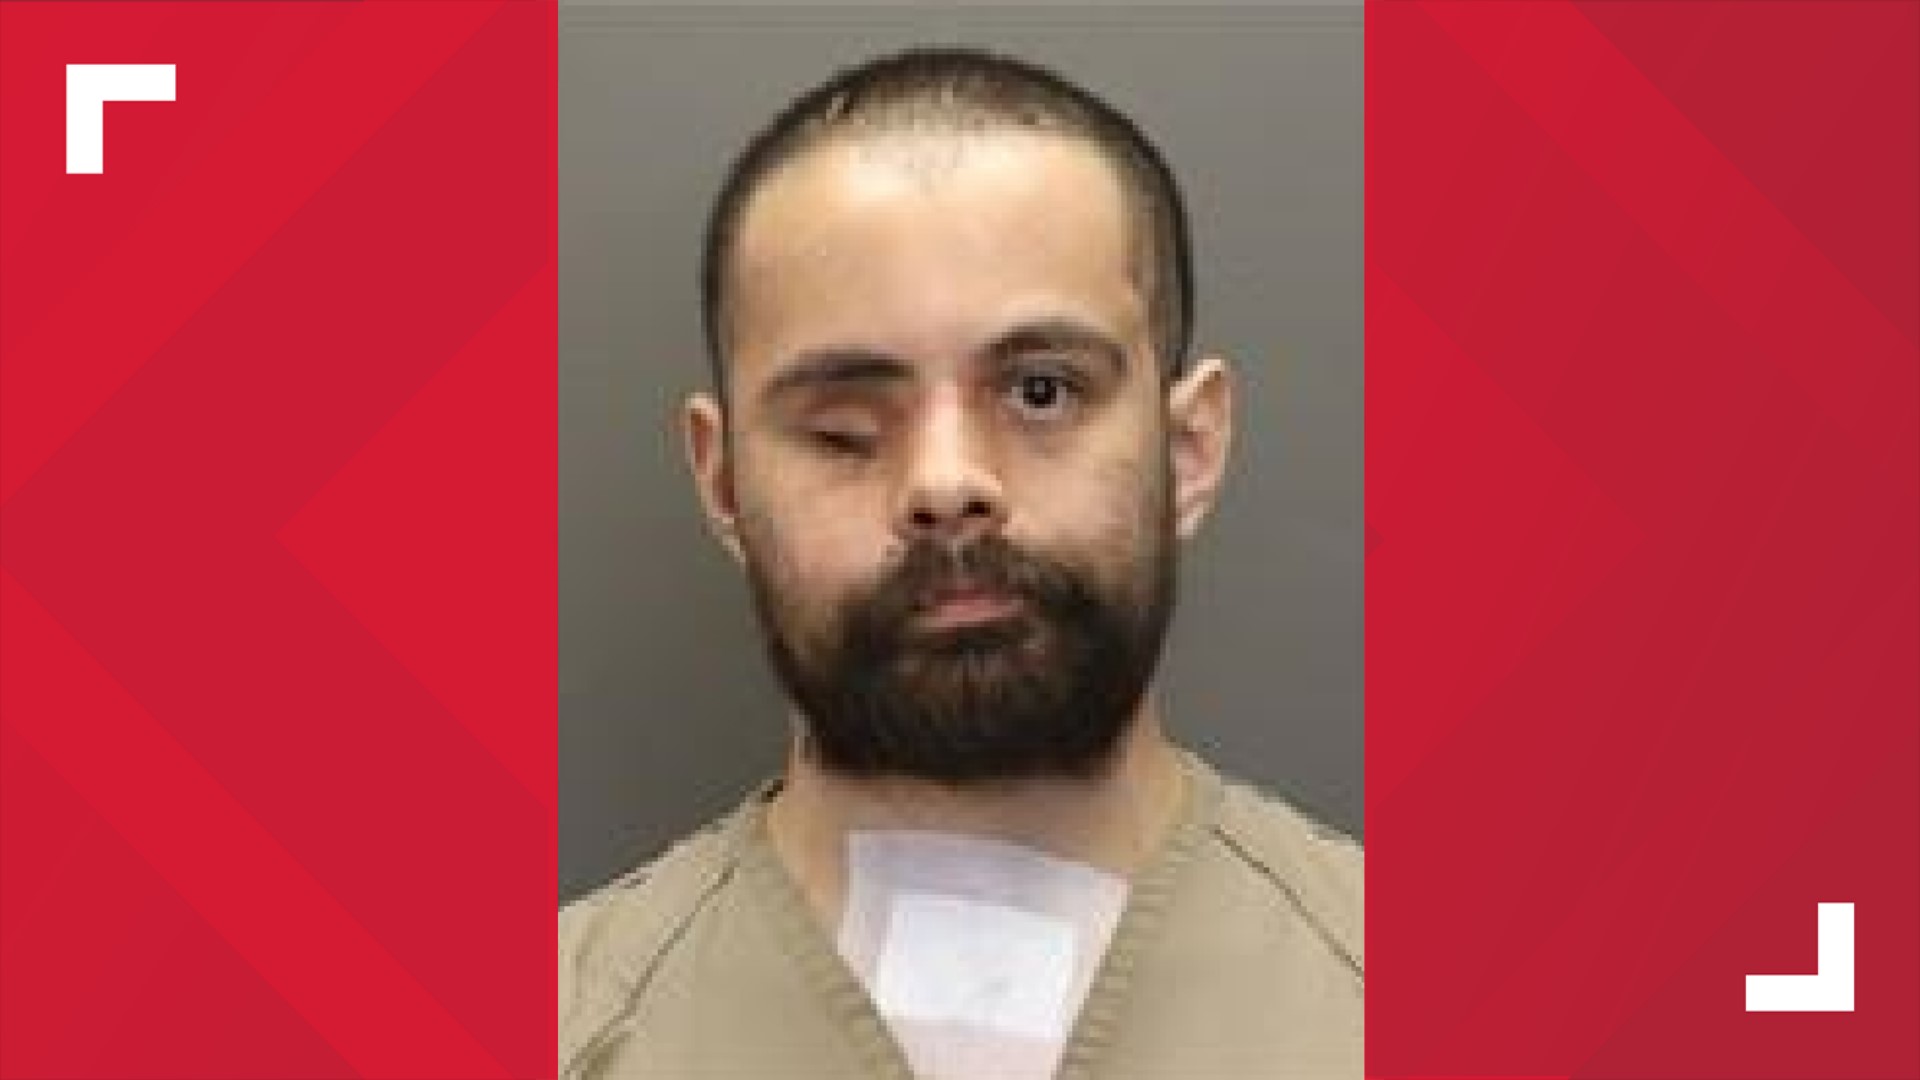 Christopher Campos-Hernandez, 29, was taken into custody Wednesday and is charged with murder.